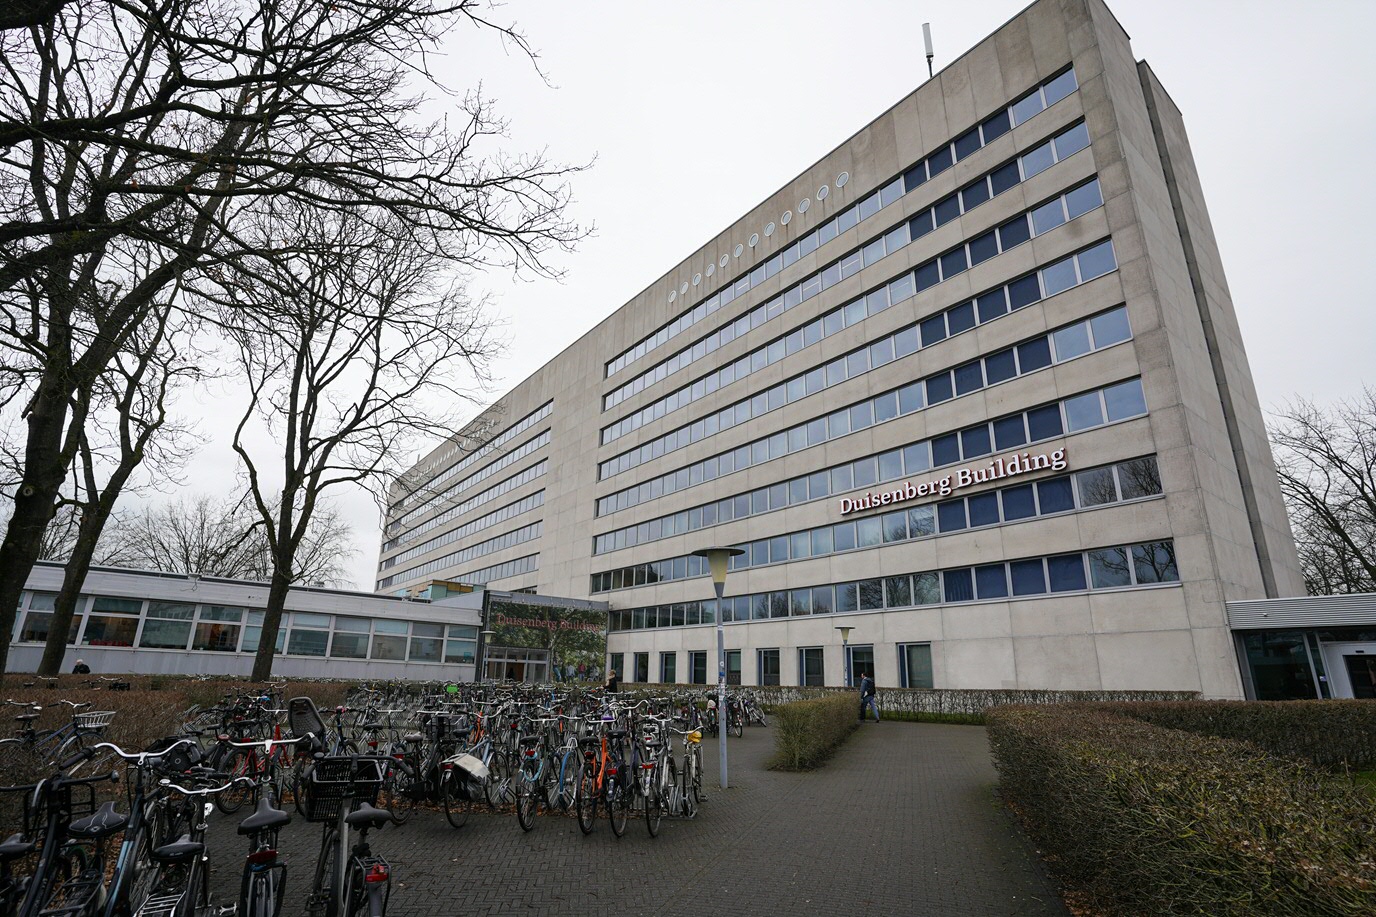 View of the back of the building, with bicycle parking spaces in front